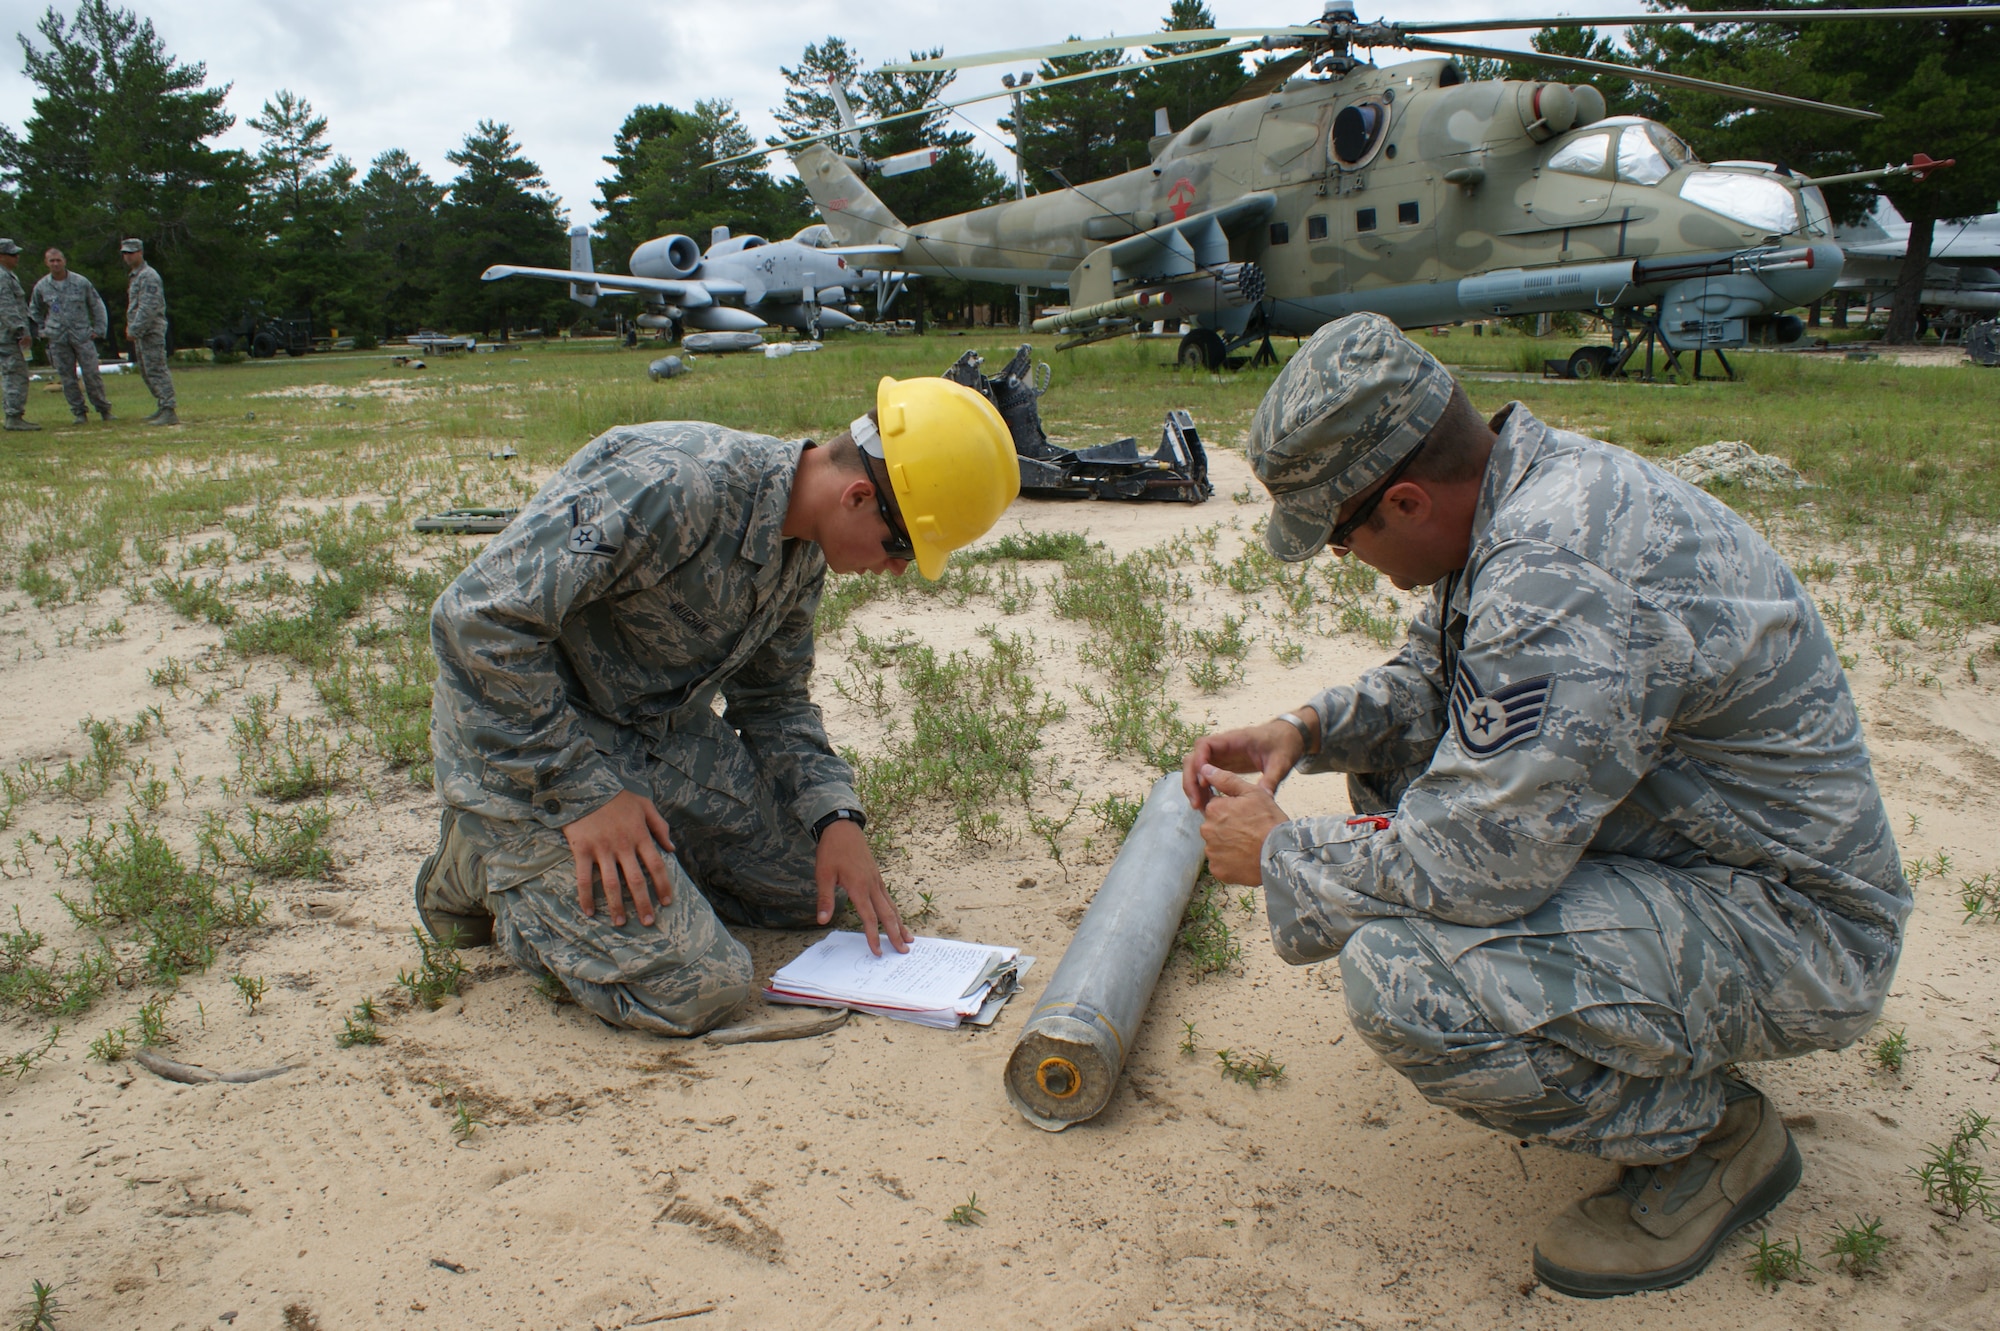 Airman Ryan Vaughn (left), EOD candidate at NAVSCOLEOD, reviews a checklist during a SUU-25 download exercise while EOD instructor Staff Sgt. Charles Howell looks on Jul. 20, 2012 at Eglin Air Force Base, Florida.  The download exercise is part of the training in the Air Division of NAVSCOLEOD.  (U.S. Air Force photo/Dan Hawkins)